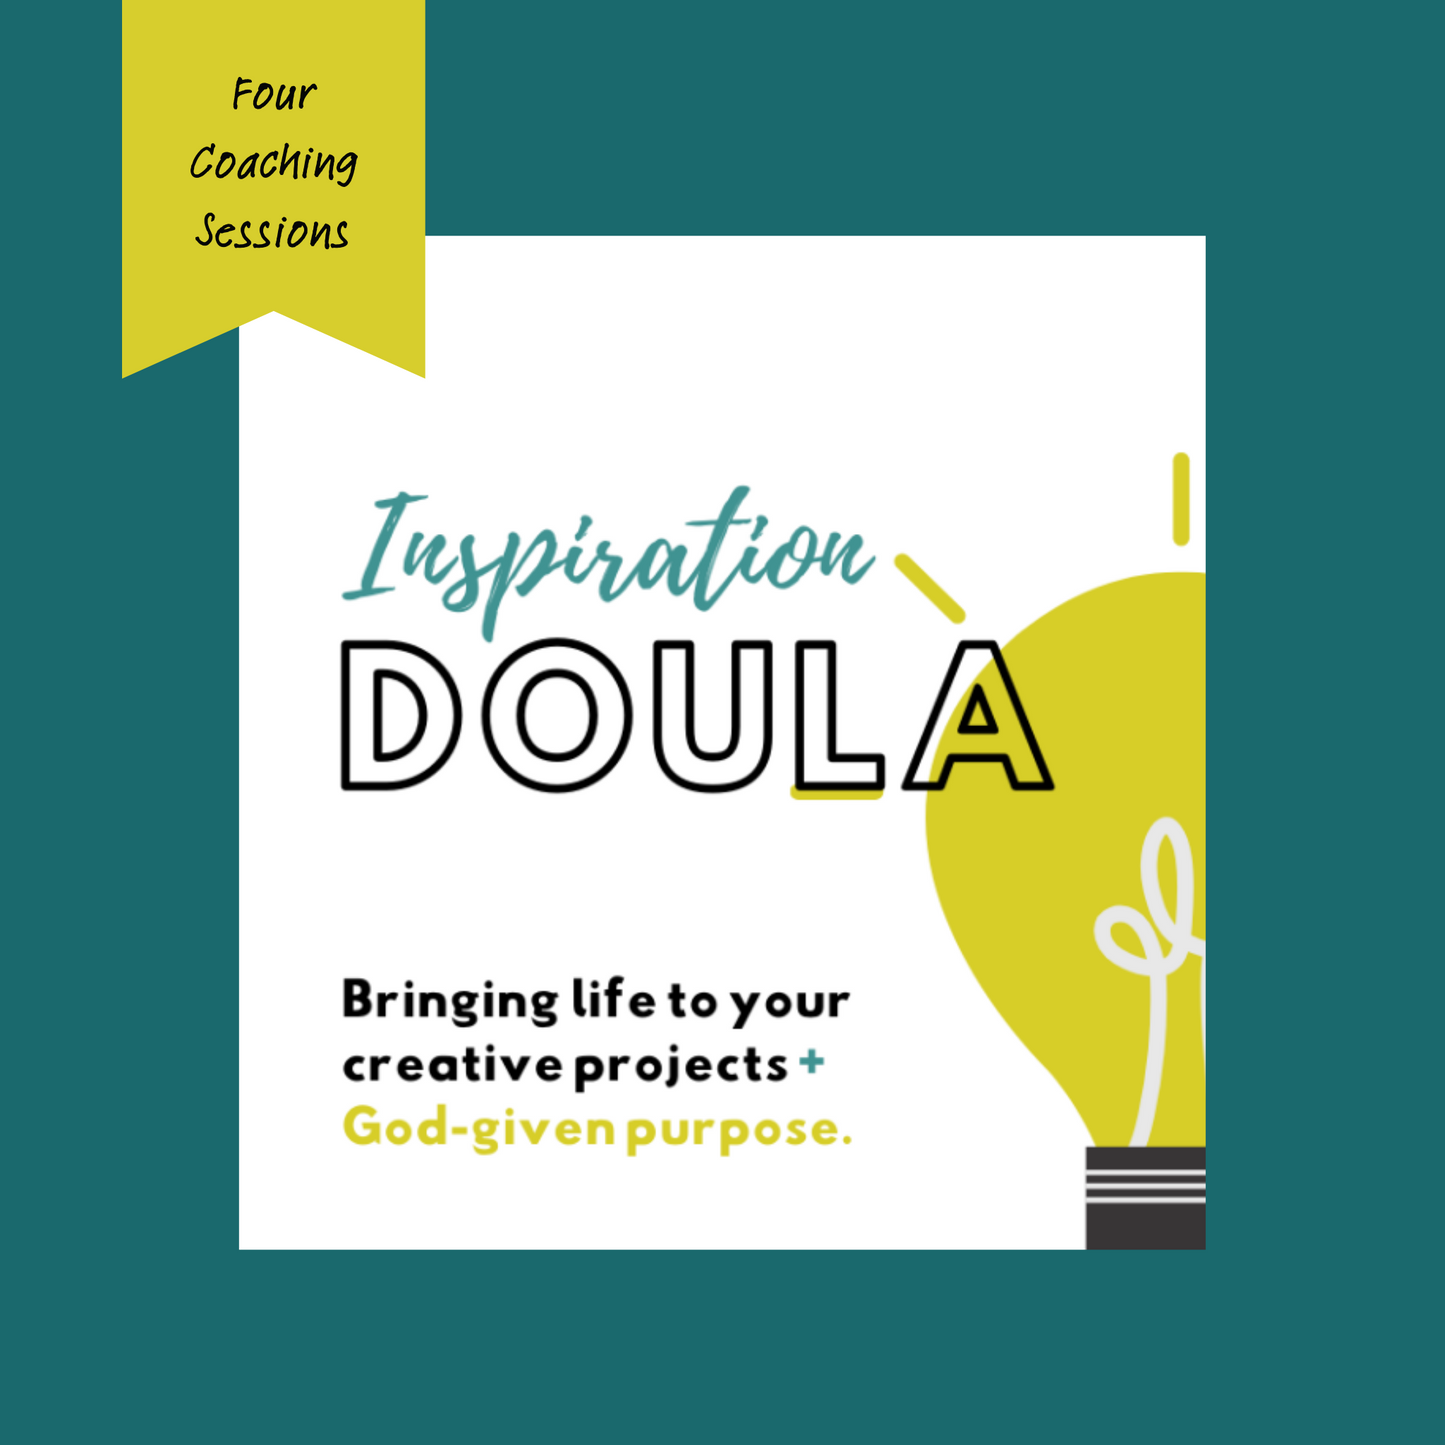 Inspiration Doula Coaching (4 Sessions)